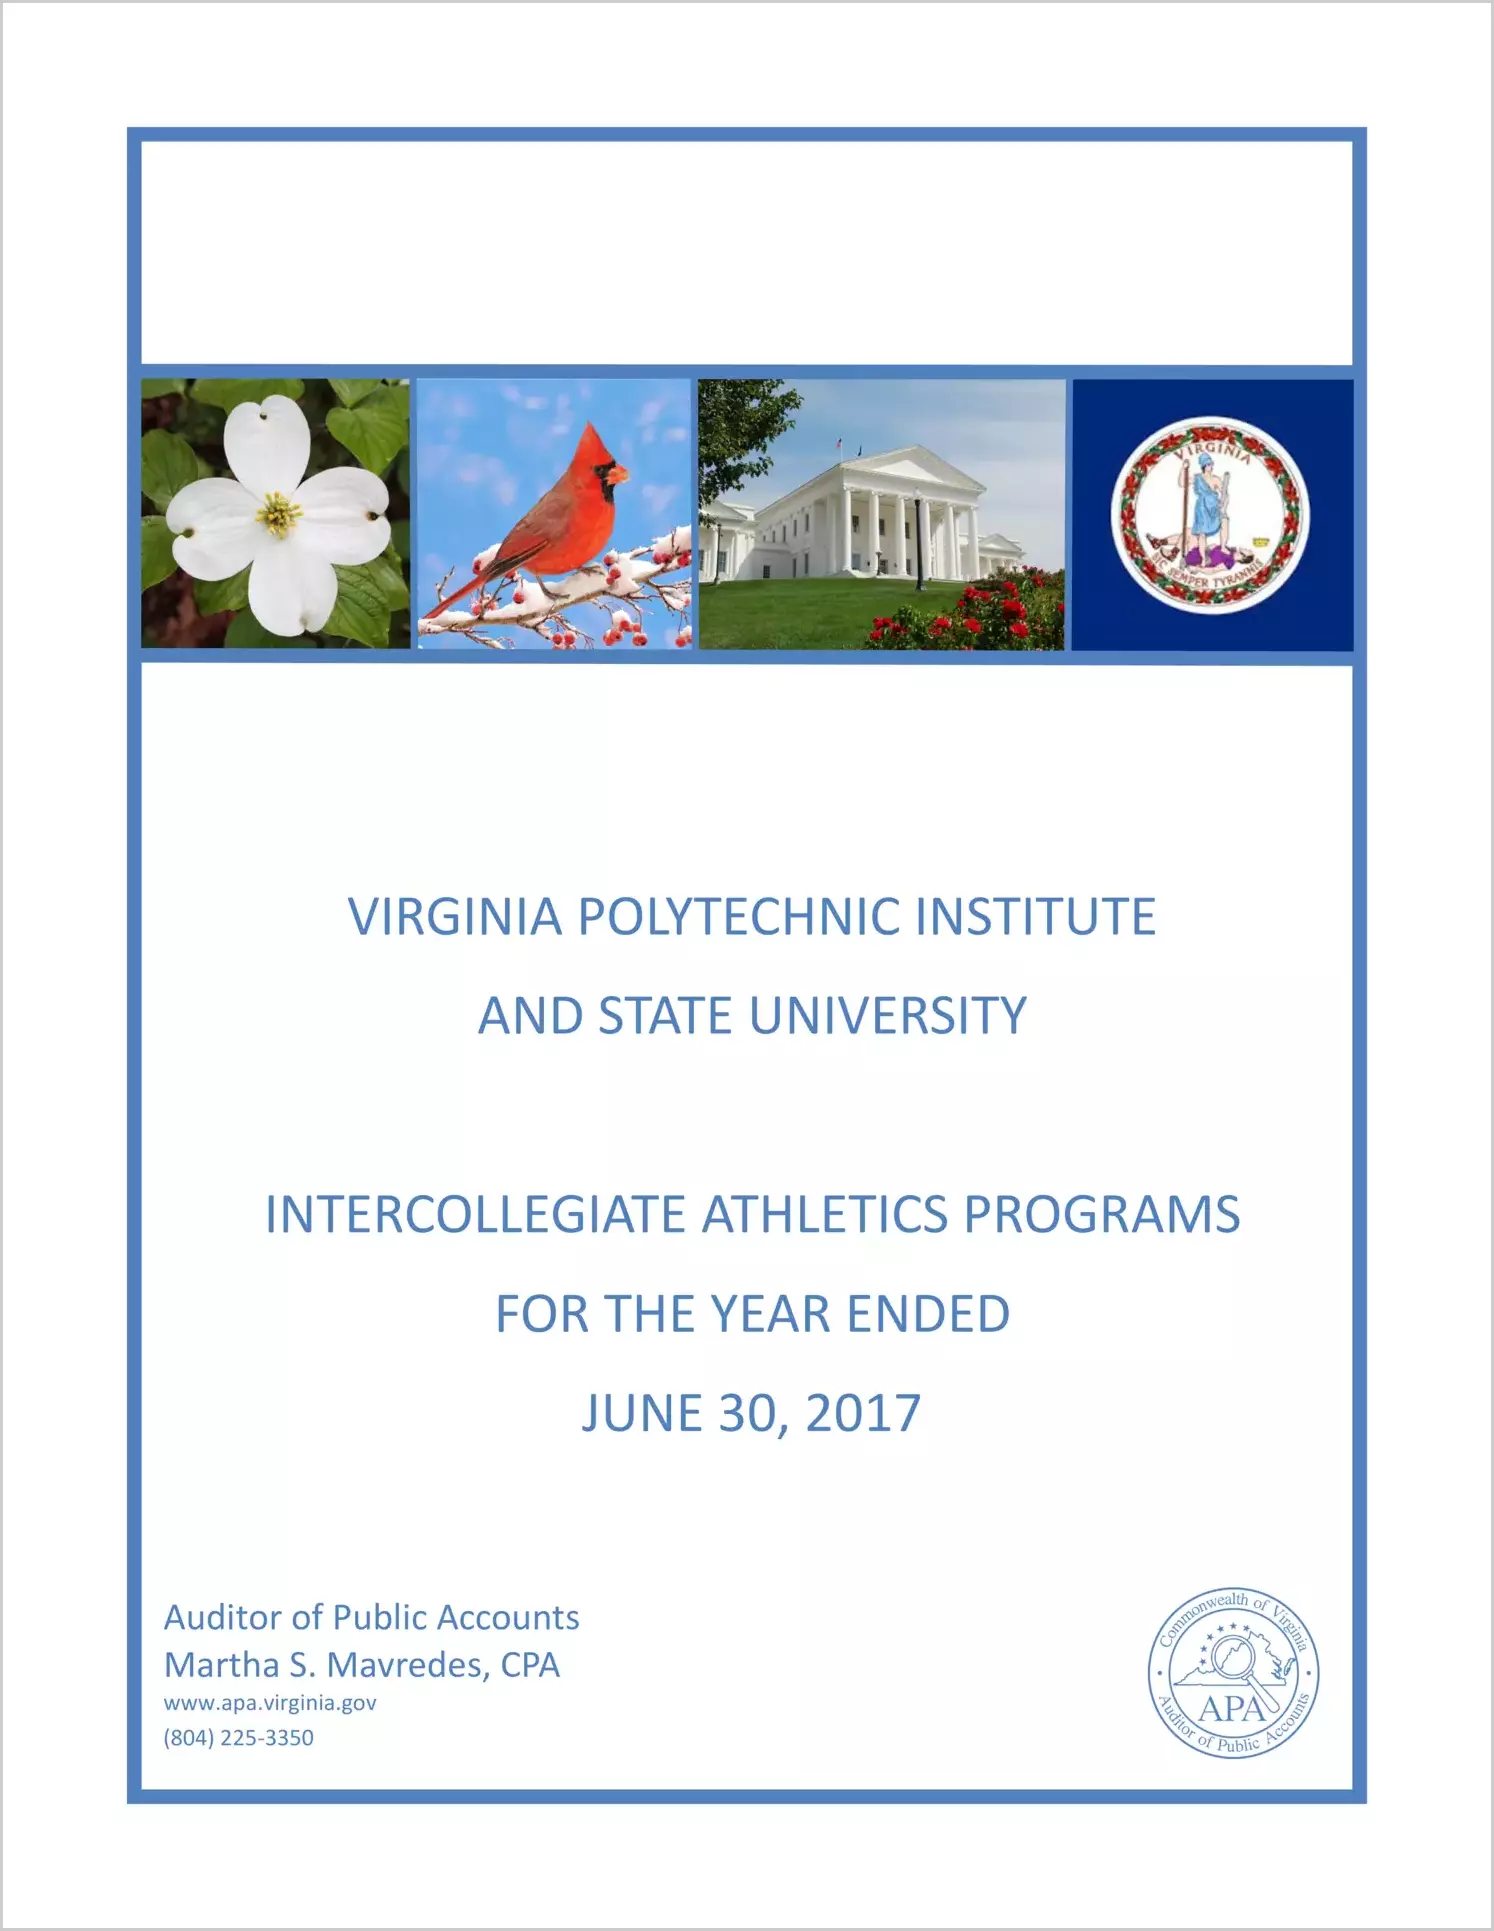 Virginia Polytechnic Institute and State University Intercollegiate Athletics Programs for the year ended June 30, 2017